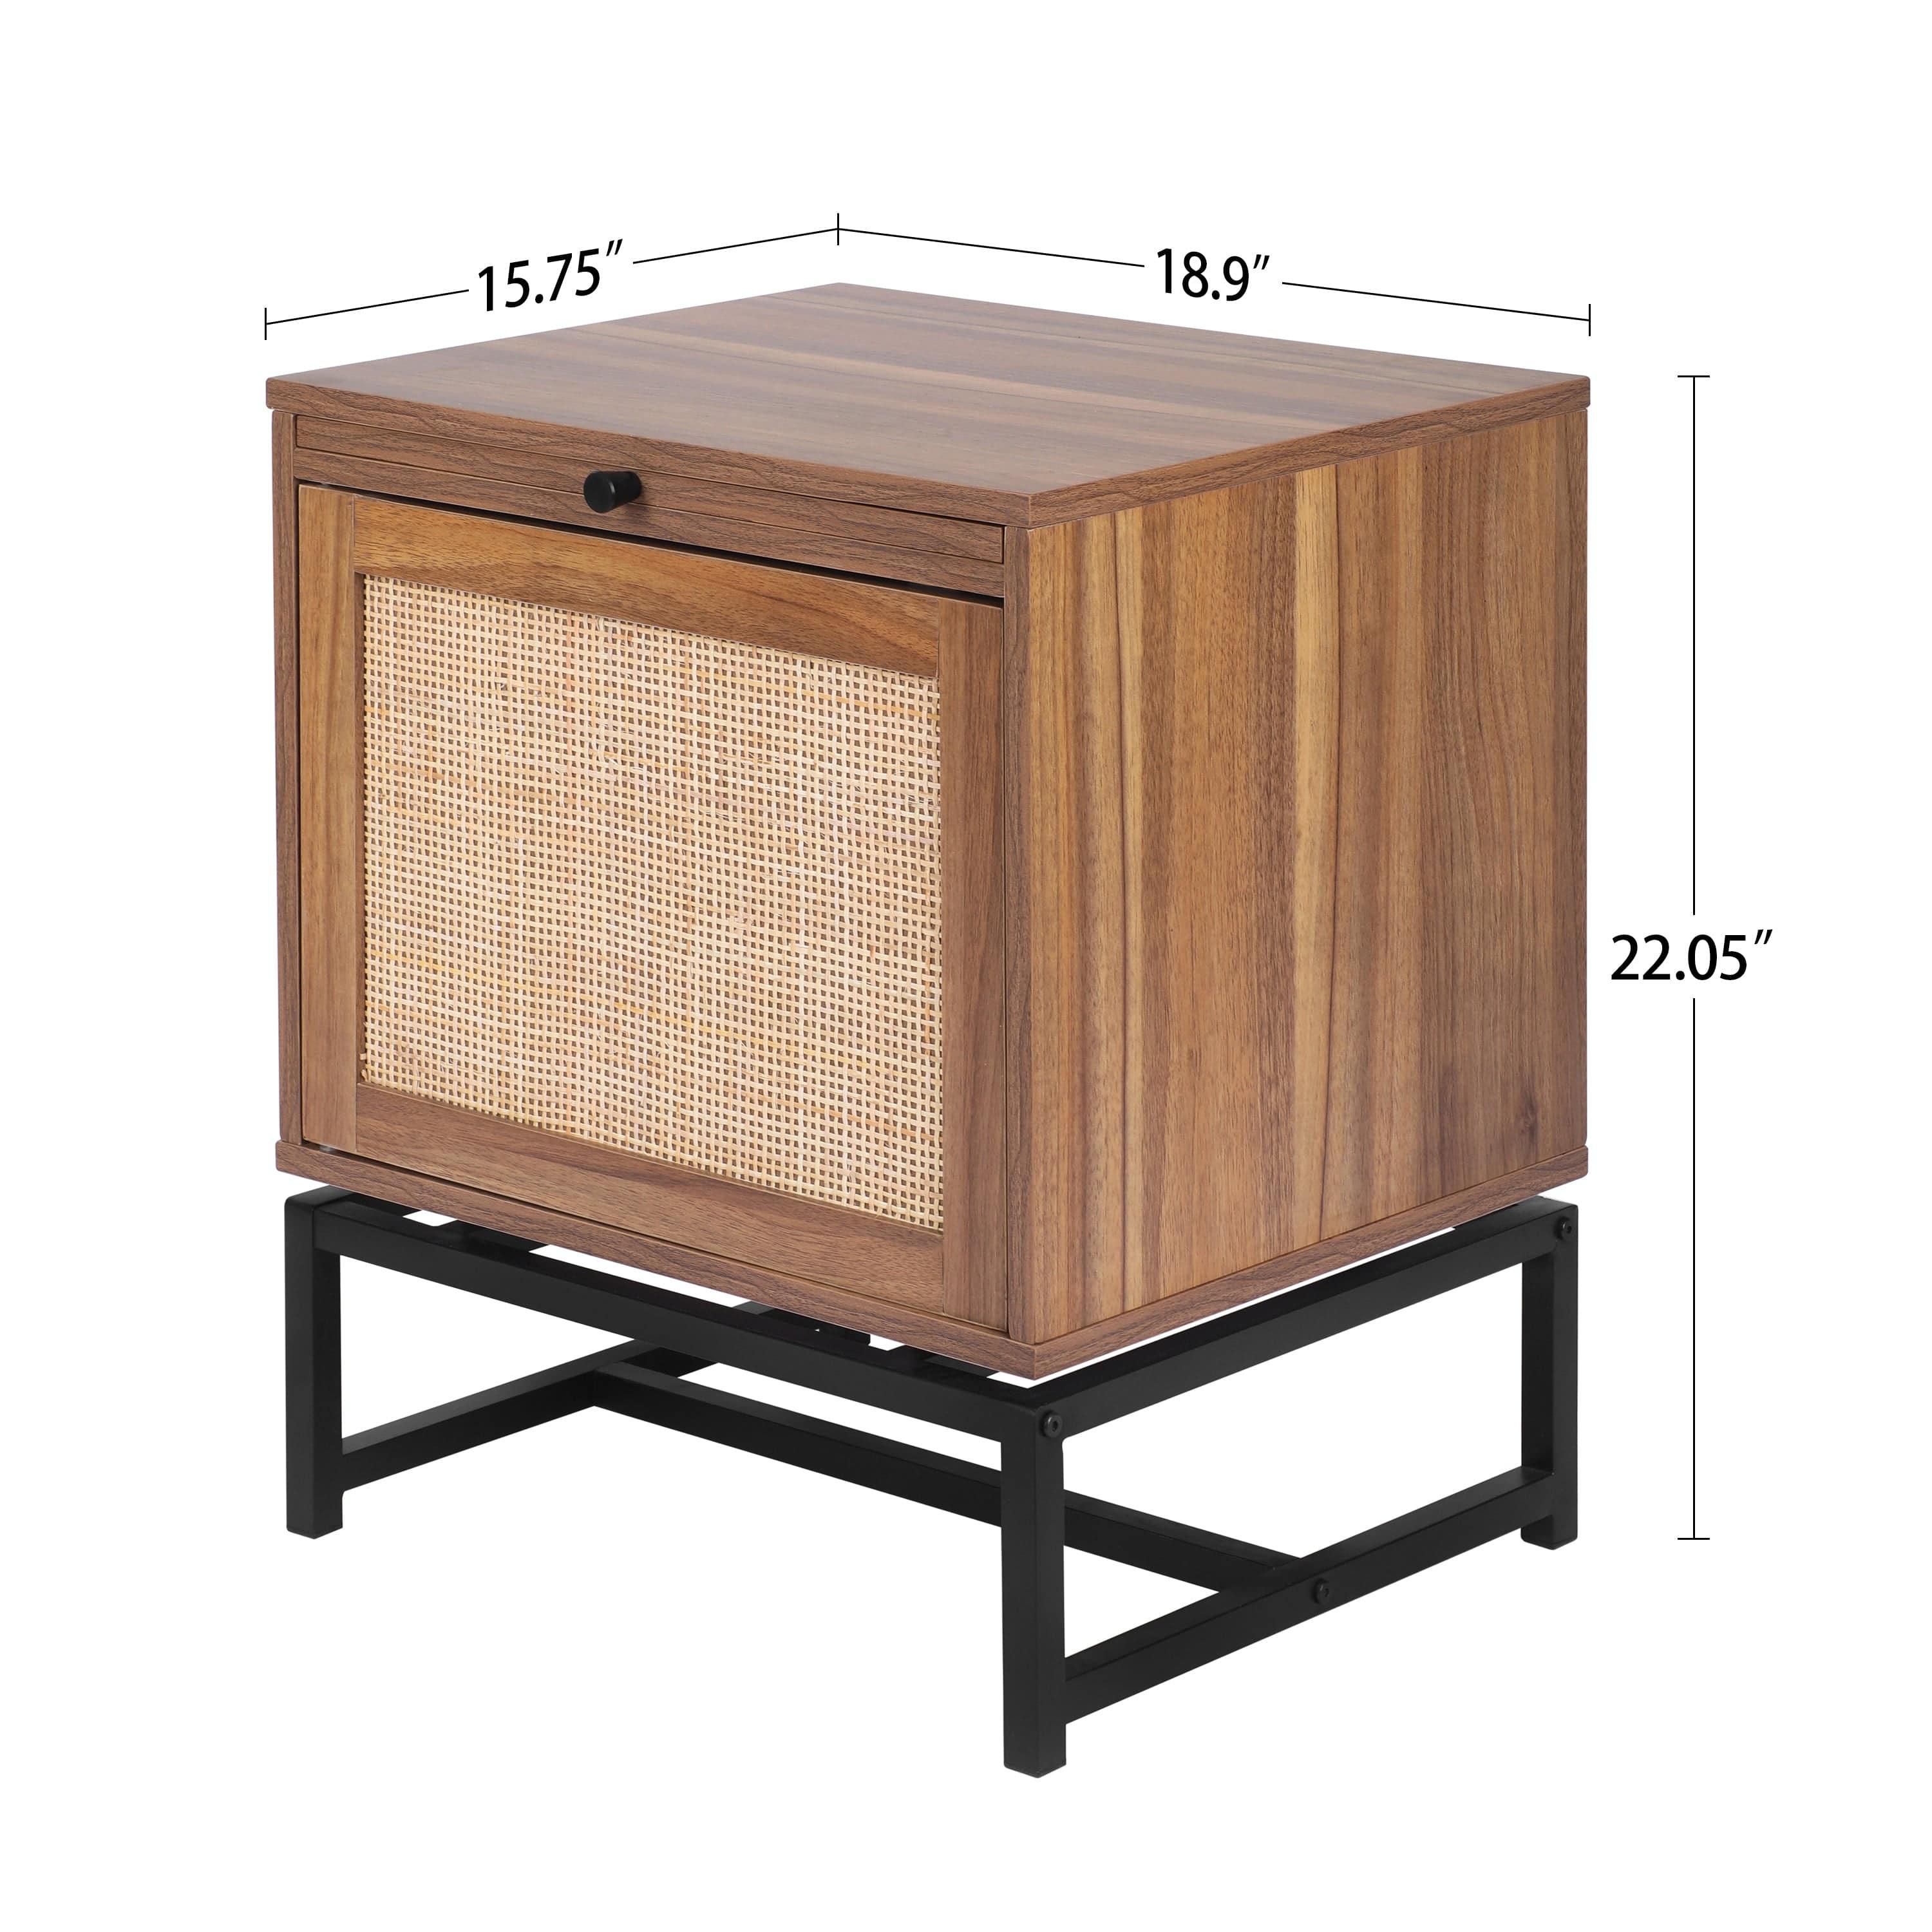 Shop Natural Rattan door nightstand，storage End Table，Accent Bedside Table for Bedroom, Living Room Mademoiselle Home Decor